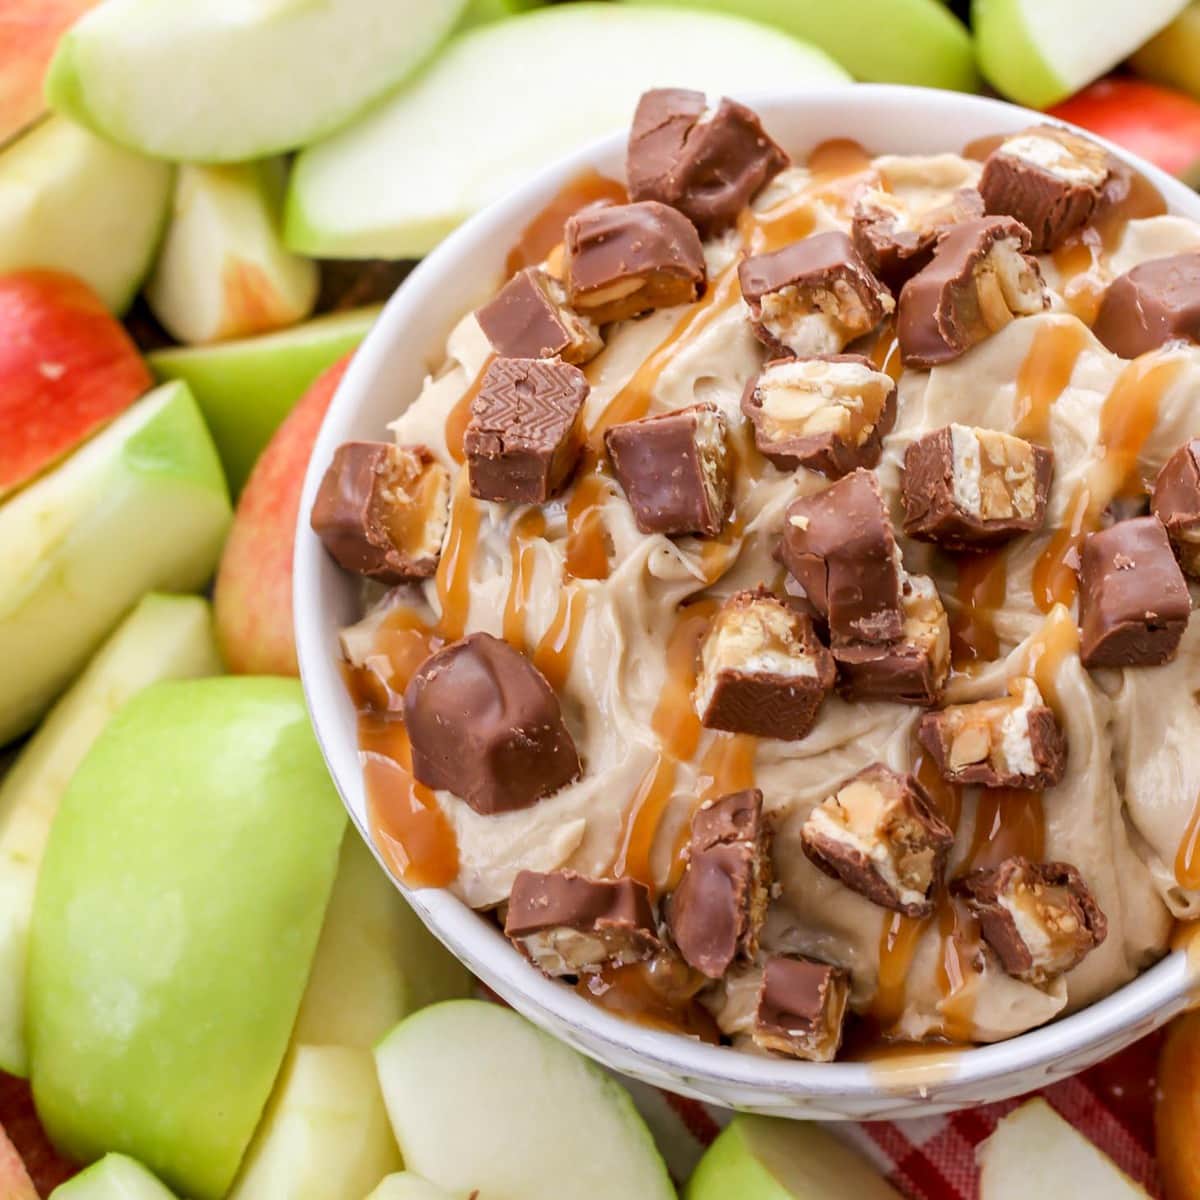 Super Bowl Appetizers - Snickers dip in a white bowl surrounded by sliced red and green apples. 